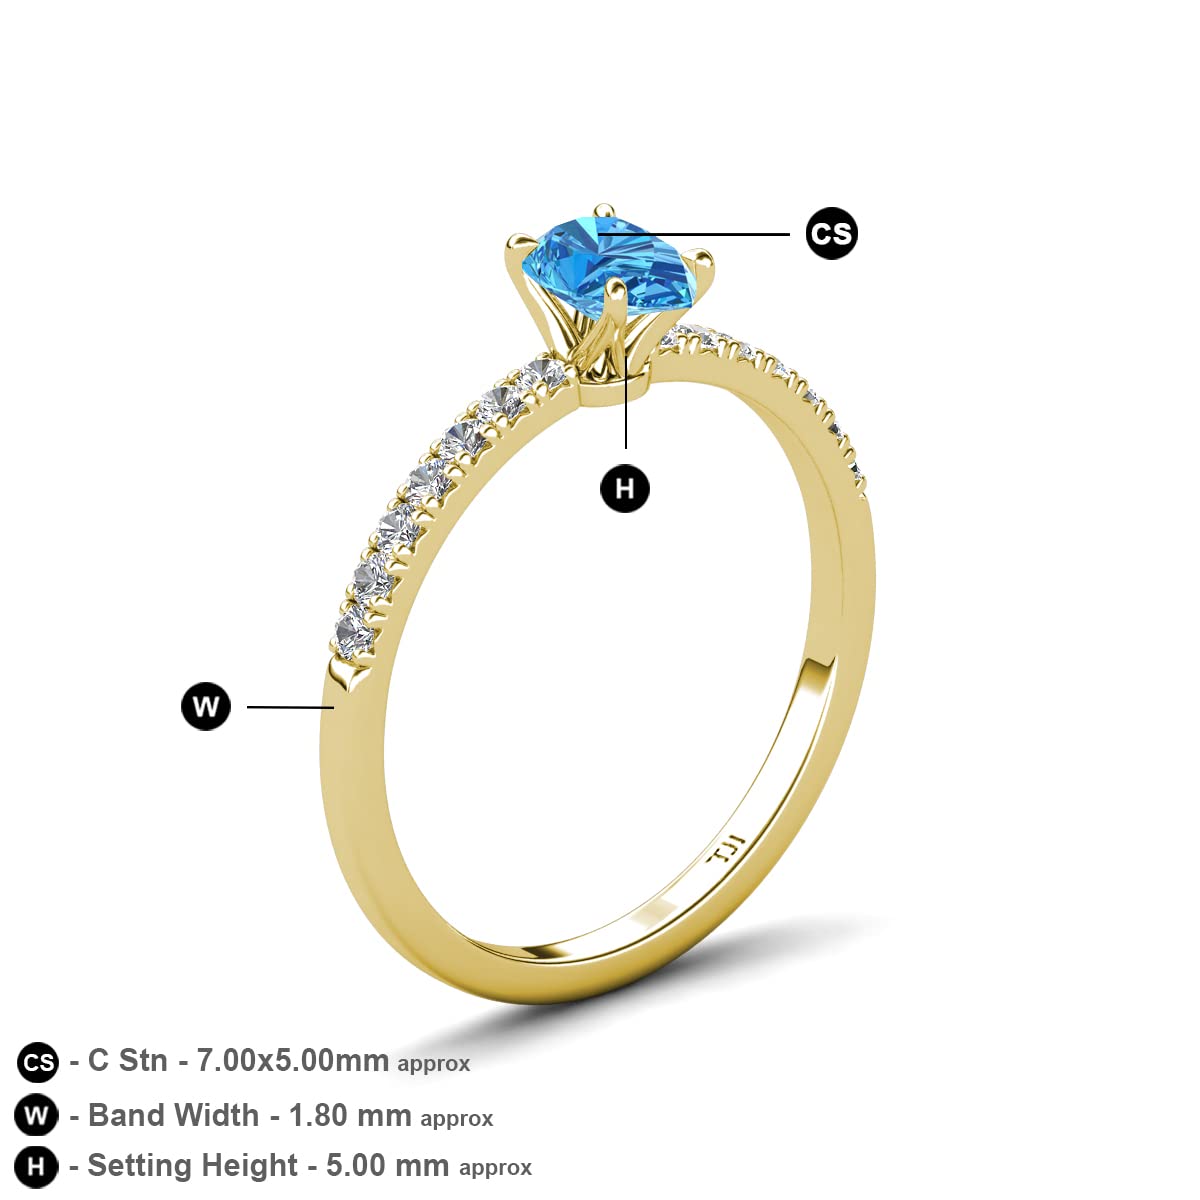 Pear Cut Blue Topaz & Round Diamond 1 1/5 ctw Tiger Claw Set Four Prong Women Engagement Ring 14K Gold